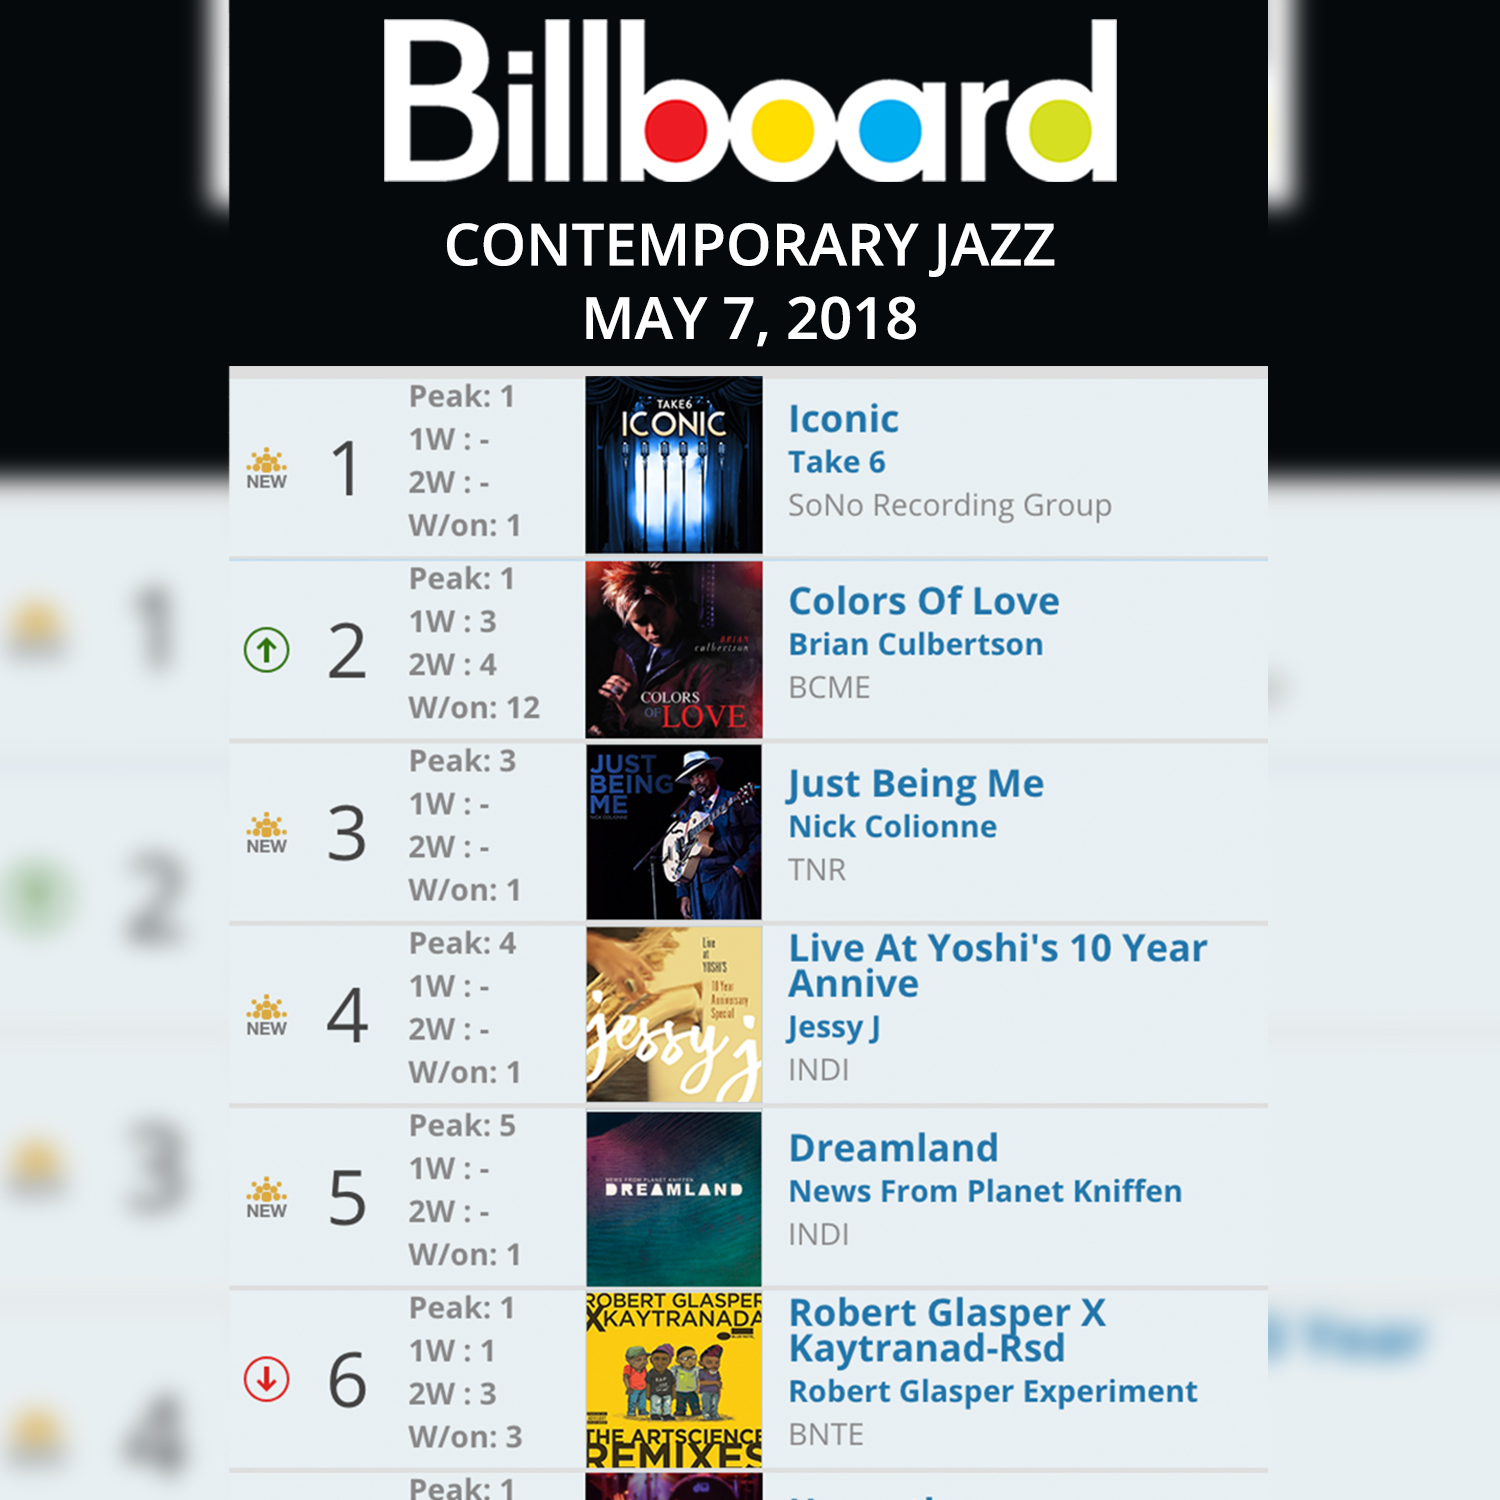 ICONIC Hits 1 on the Billboard Contemporary Jazz Chart!